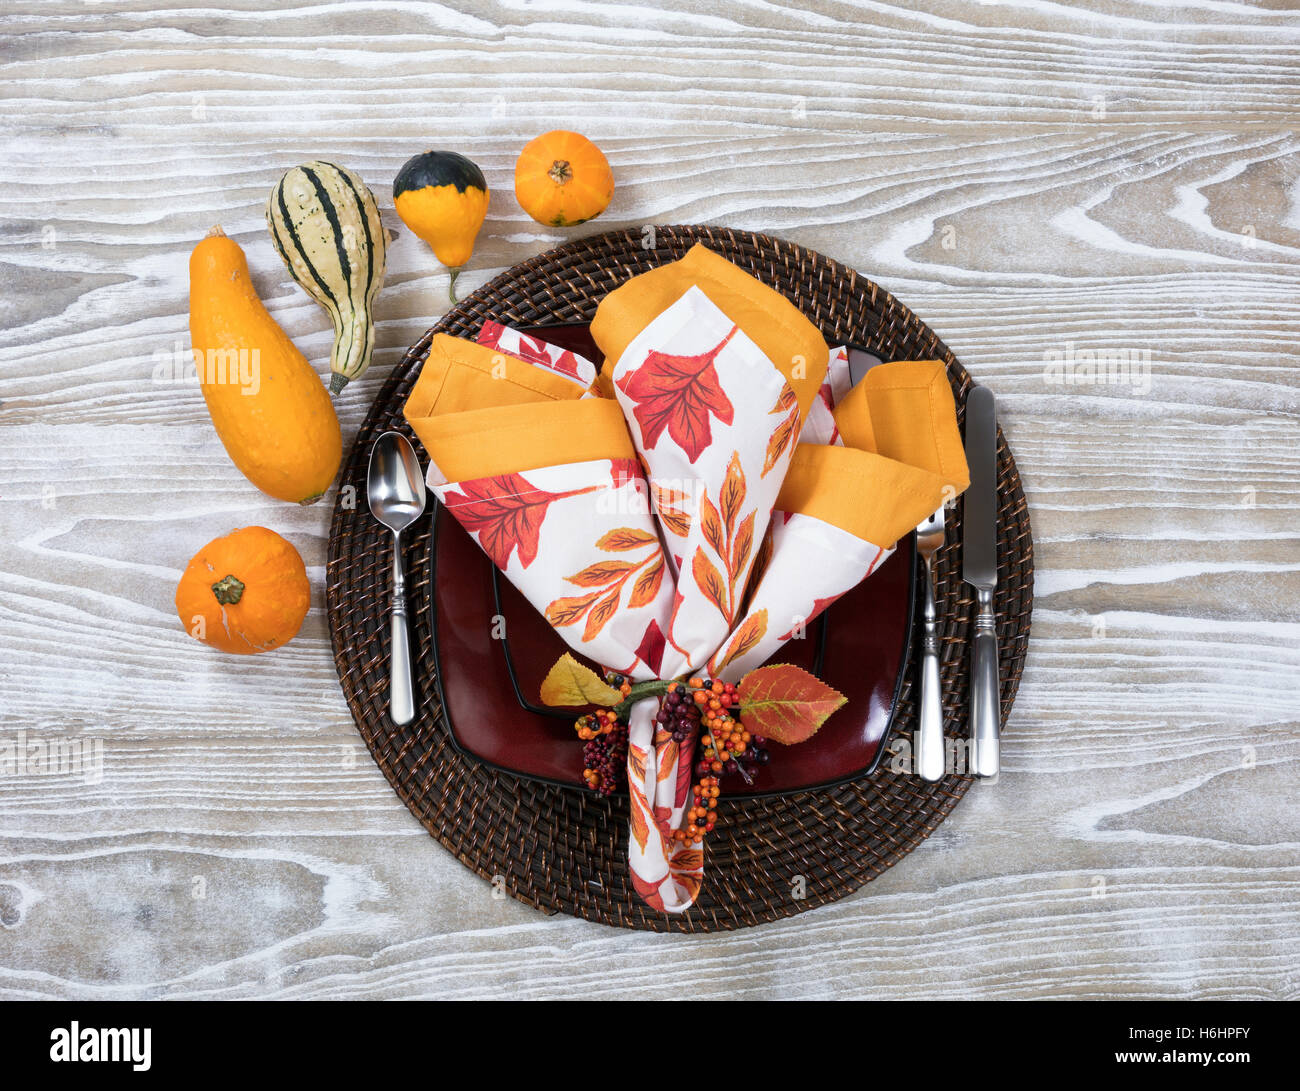 Overhead view of a festive autumn dinner setting with real gourd decorations on top of white wood Stock Photo